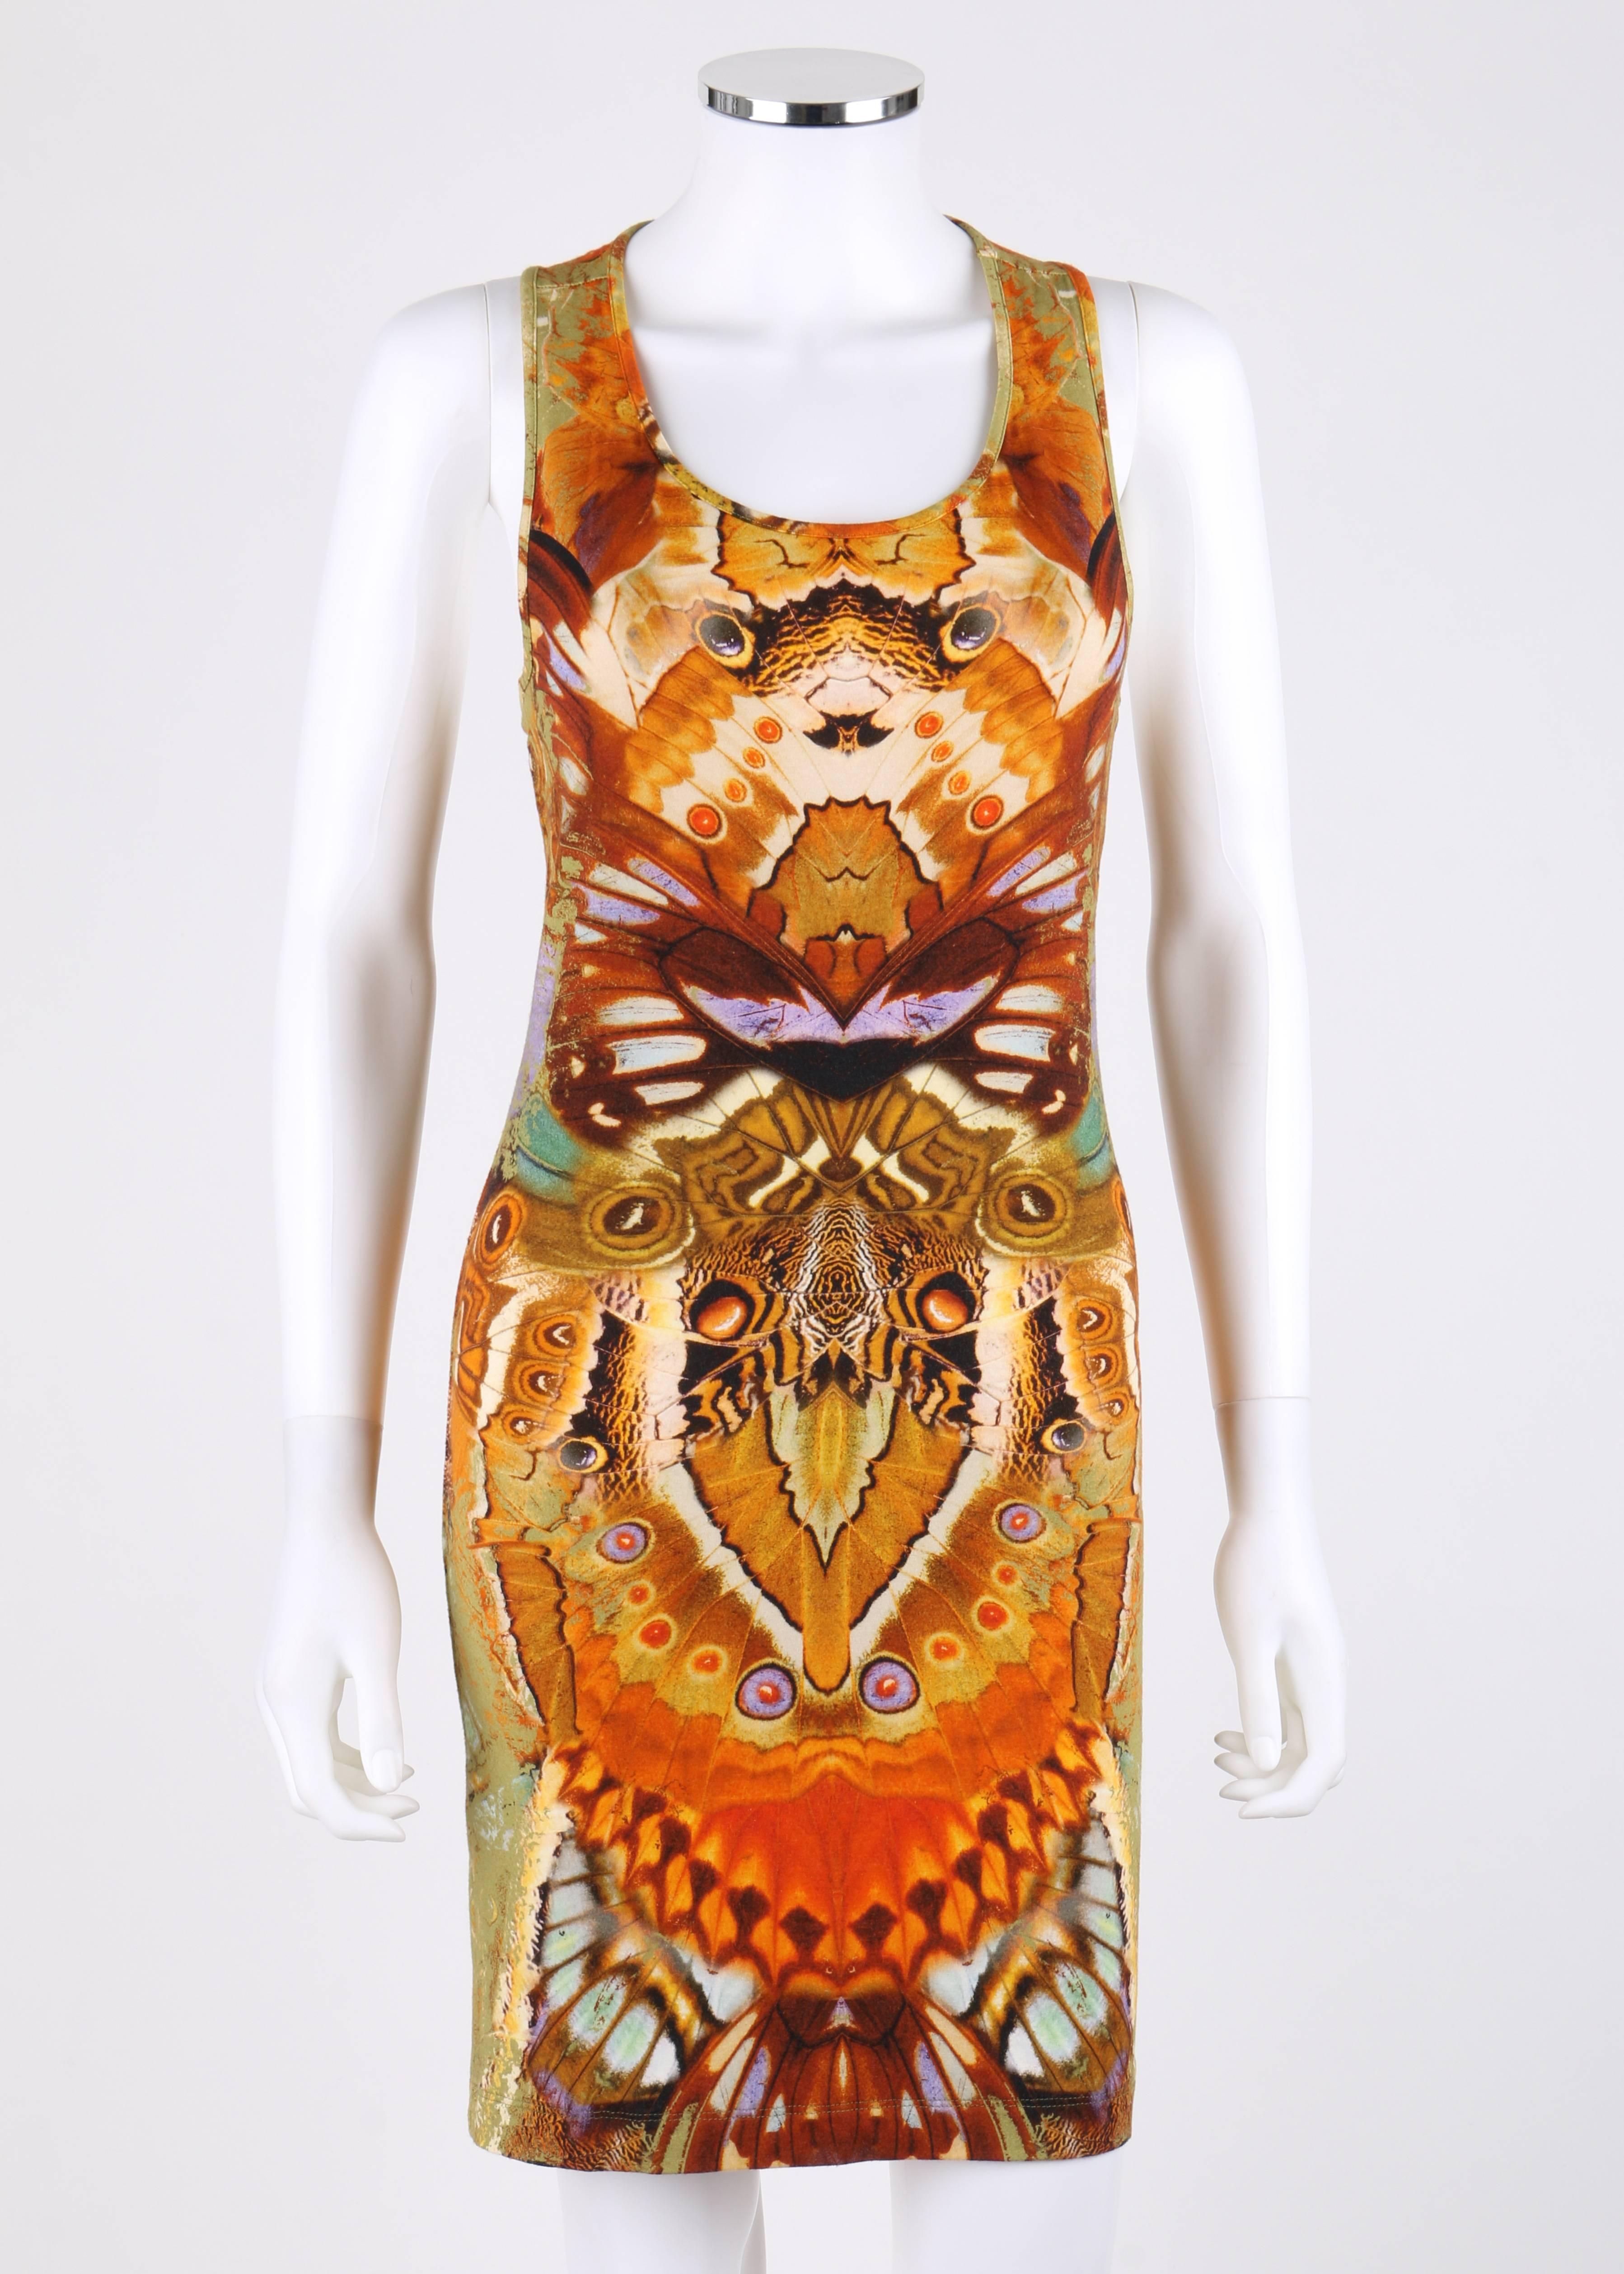 Alexander McQueen Spring 2010 moth camouflage print from the Plato's Atlantis collection tank dress. All over signature kaleidoscope moth camouflage print. Sleeveless. Scoop neckline. Racer back. Bodycon fit. Marked Fabric: 